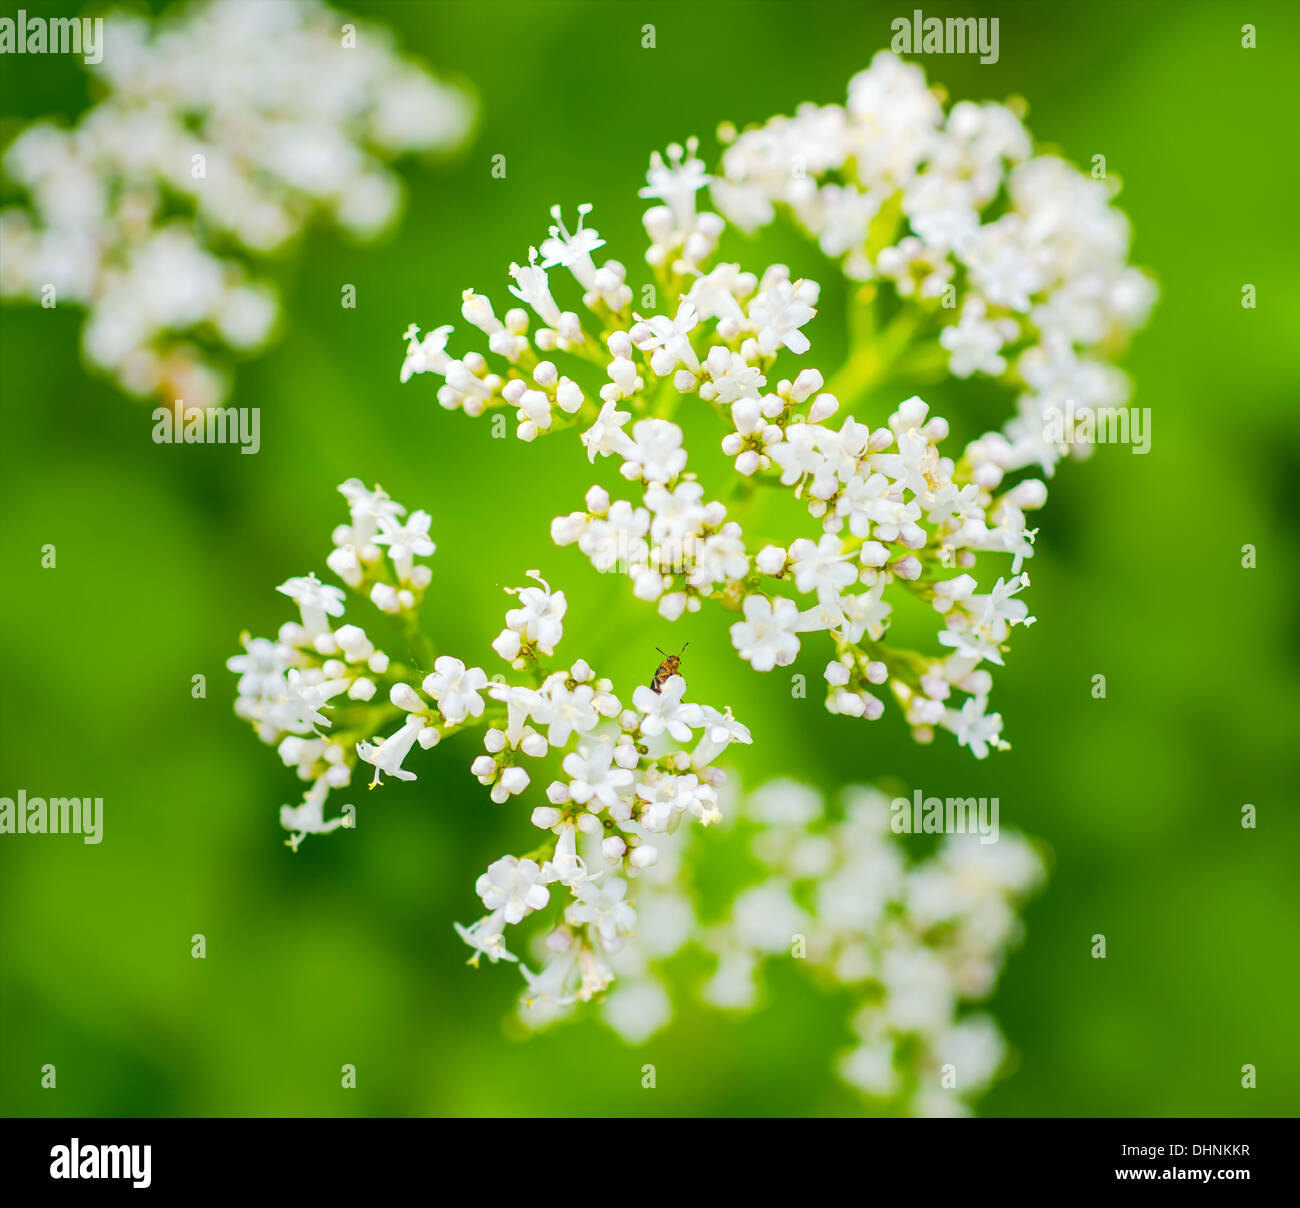 valerian flower with an insect, green background Stock Photo